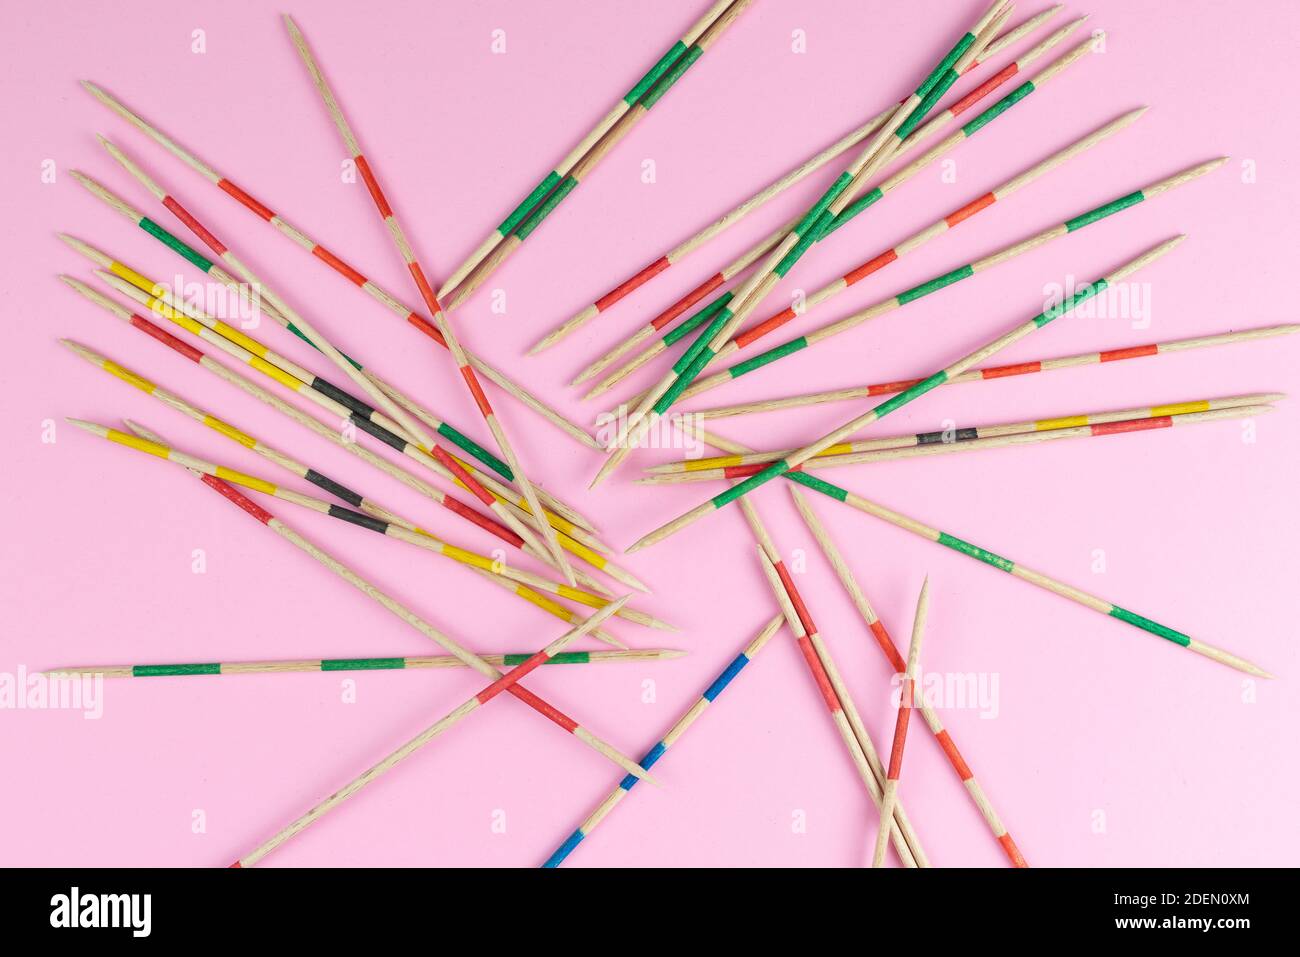 directly above view of jumble of wooden mikado pick-up sticks on pink background Stock Photo